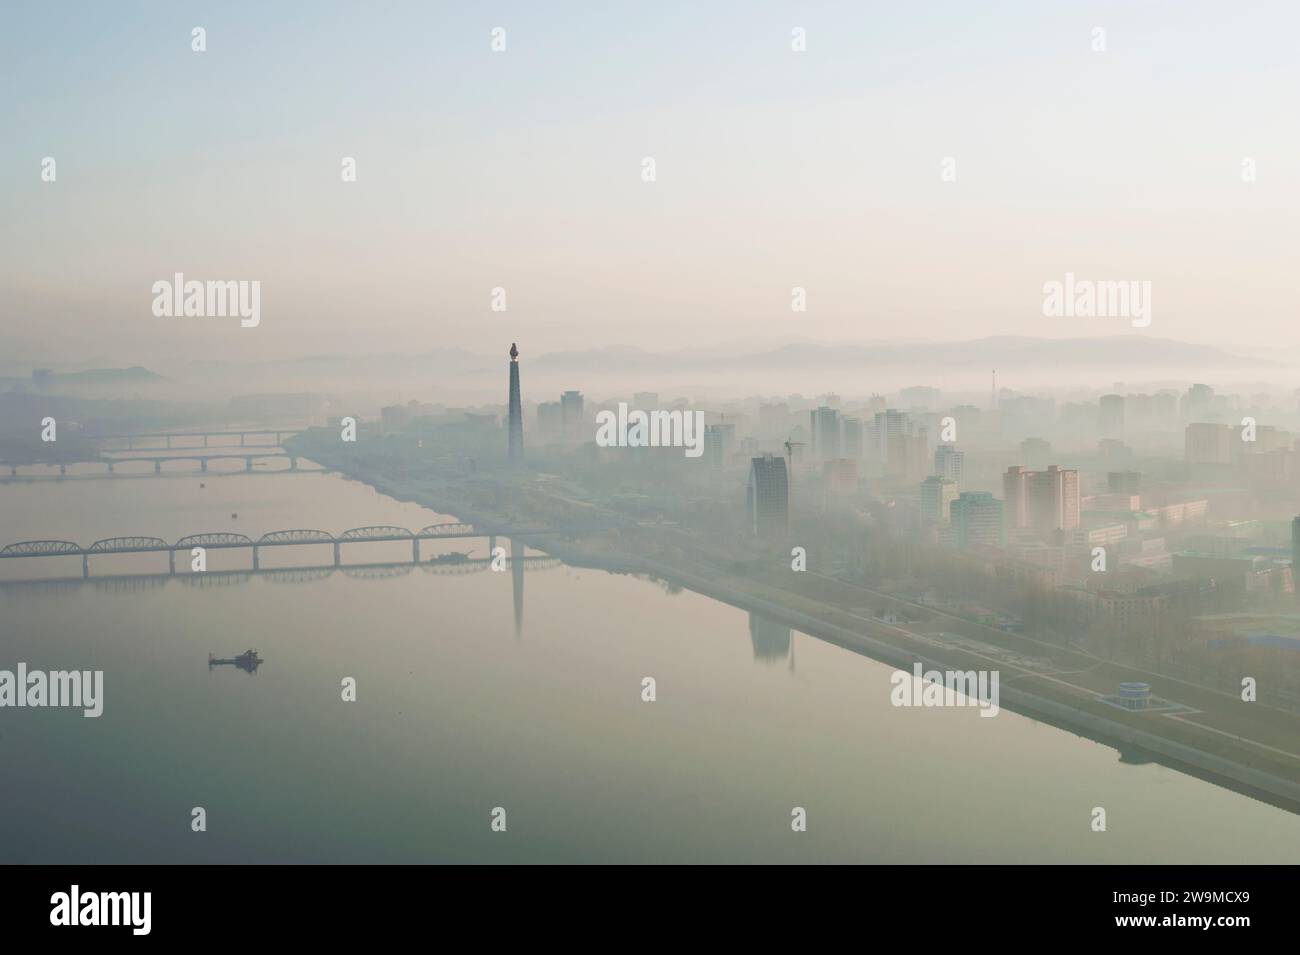 The view of the Taedong River and Juche Tower in Pyongyang in North Korea during a misty early morning sunrise. Stock Photo